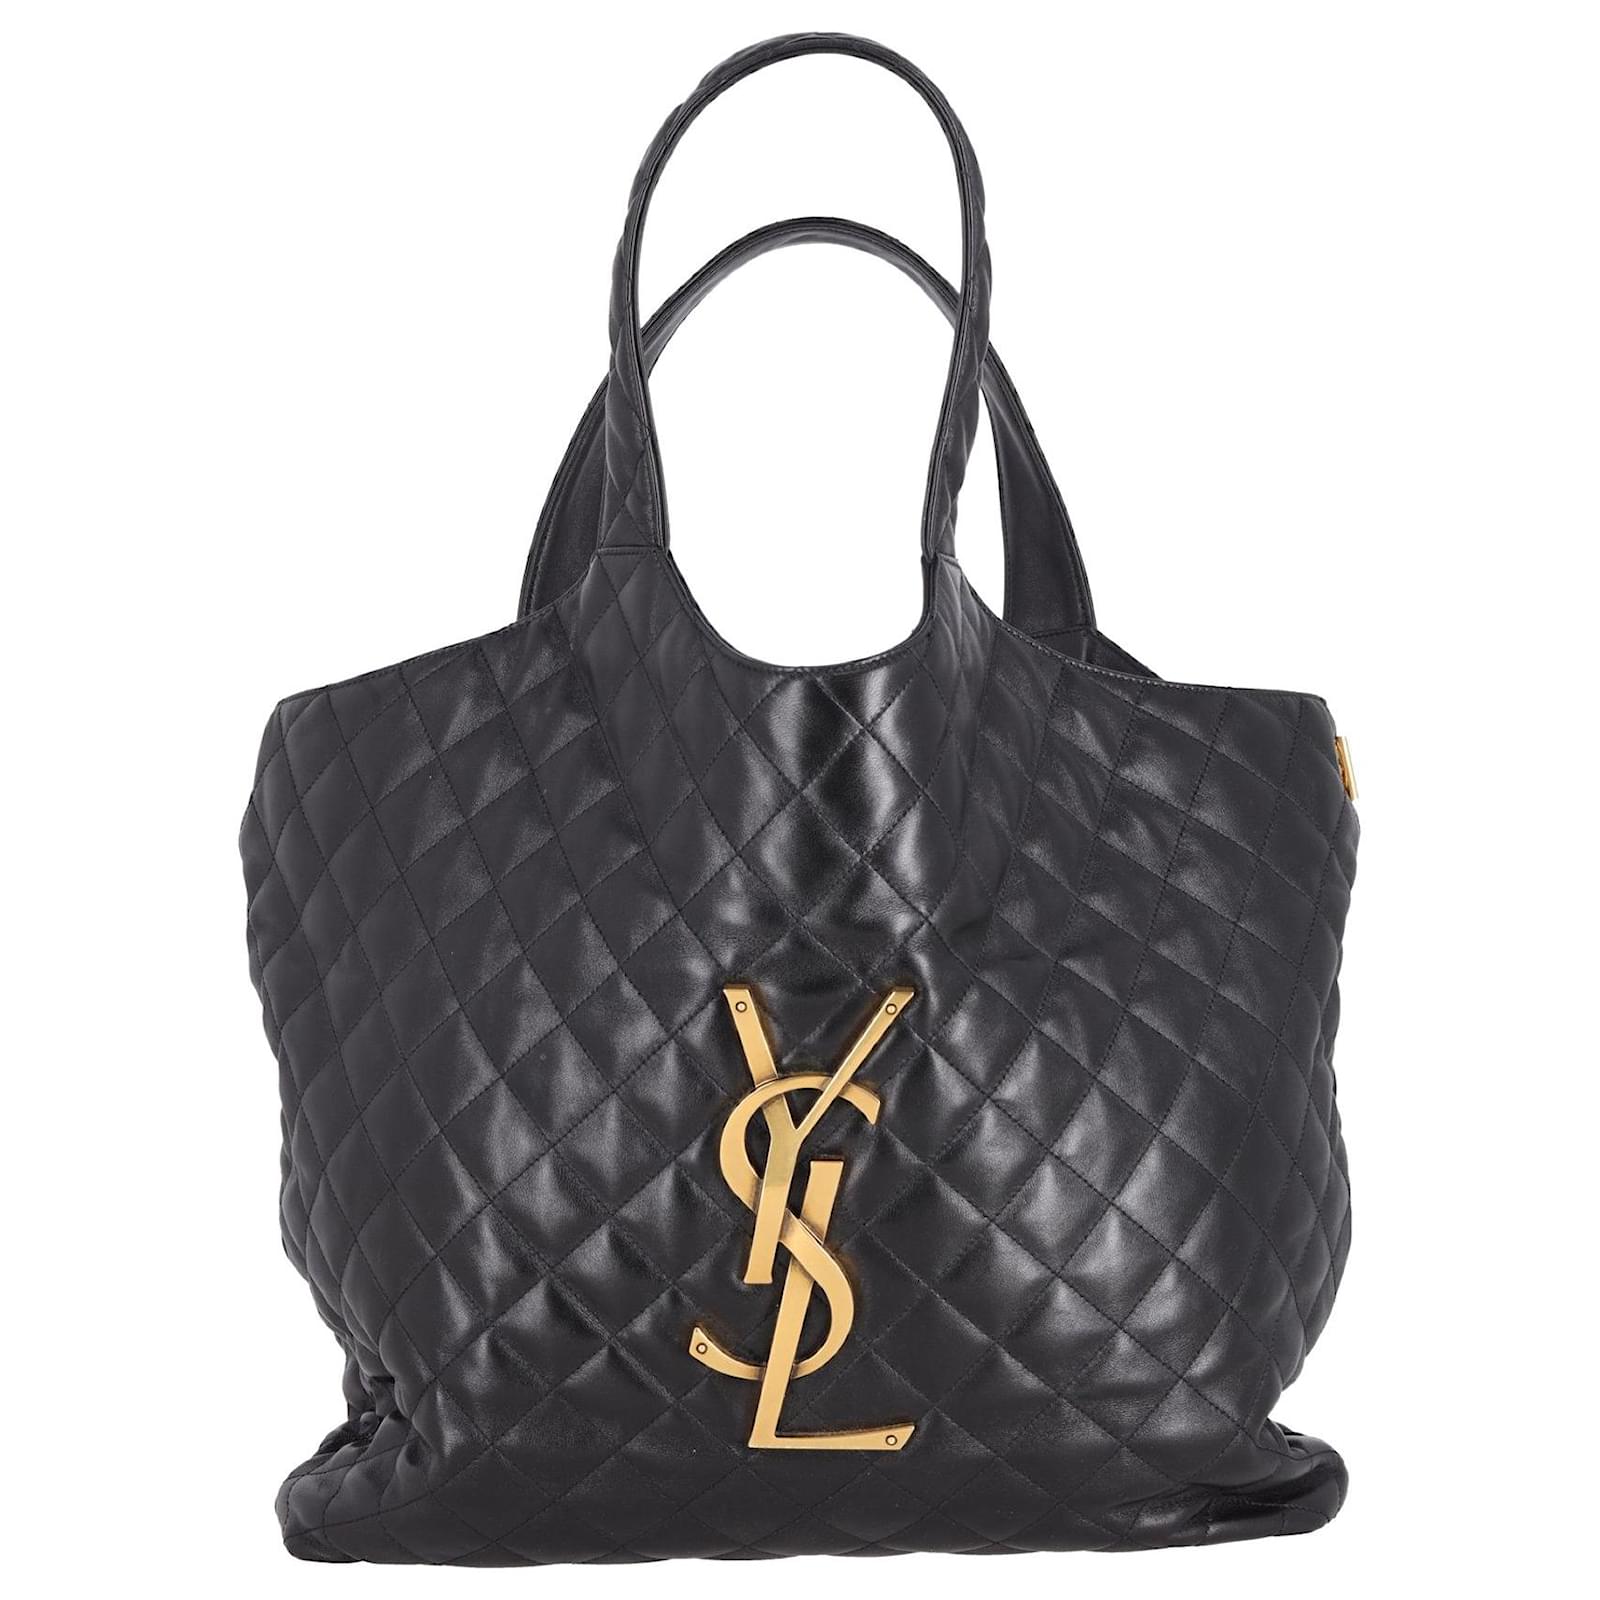 Saint Laurent Icare Maxi Shopping Tote Bag in Black Quilted